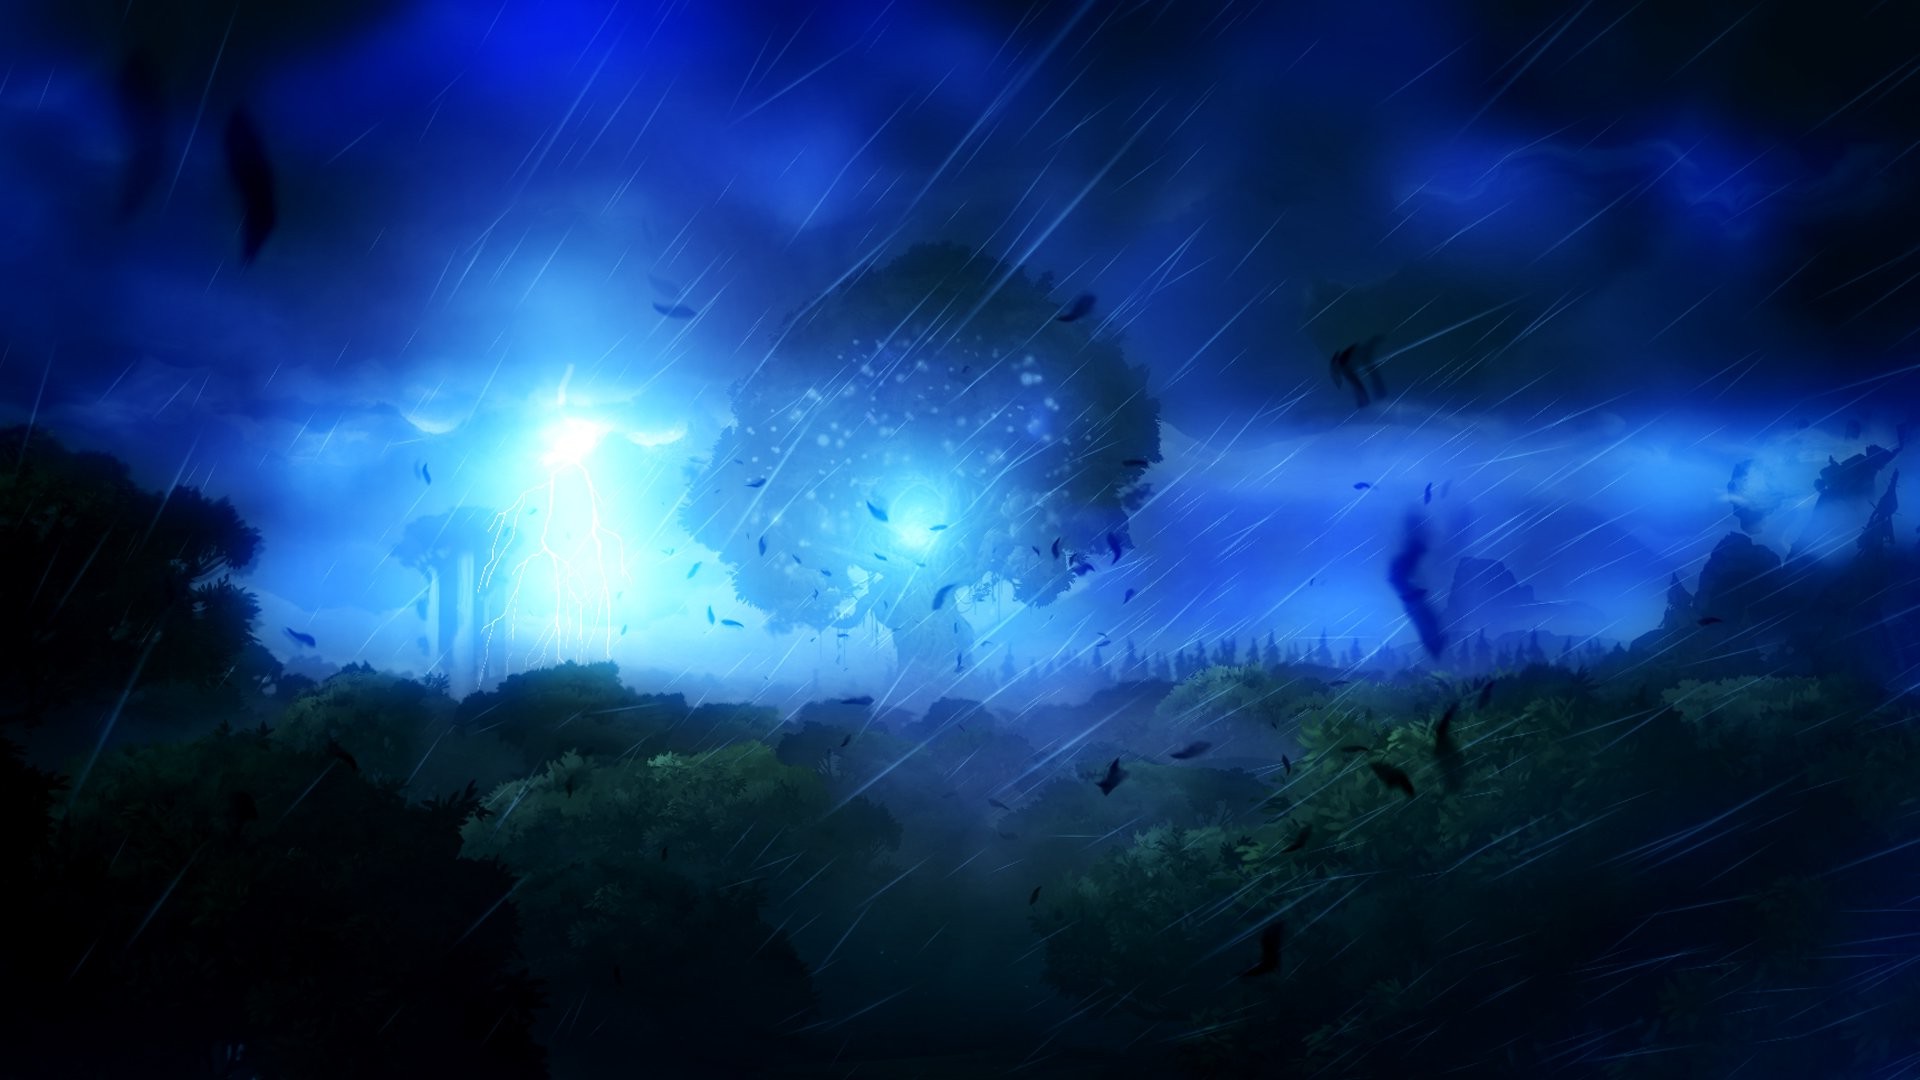 Ori And The Blind Forest, Forest, Trees, Spirits, Landscape, Lights, Storm, Nature Wallpaper